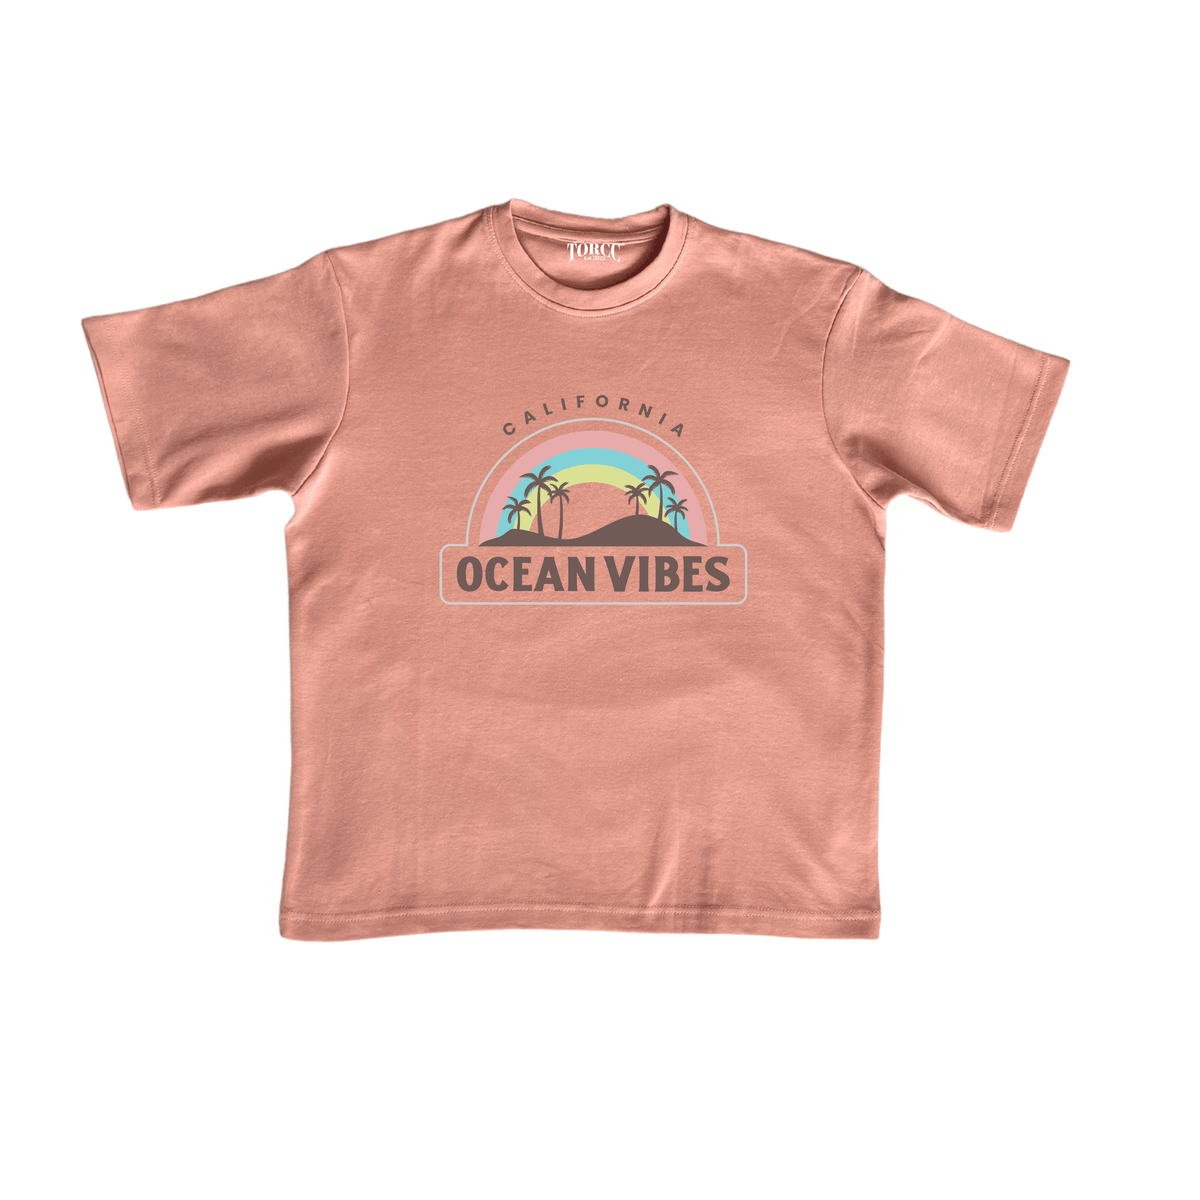 California - Ocean Vibes: Oversized Graphic Tees